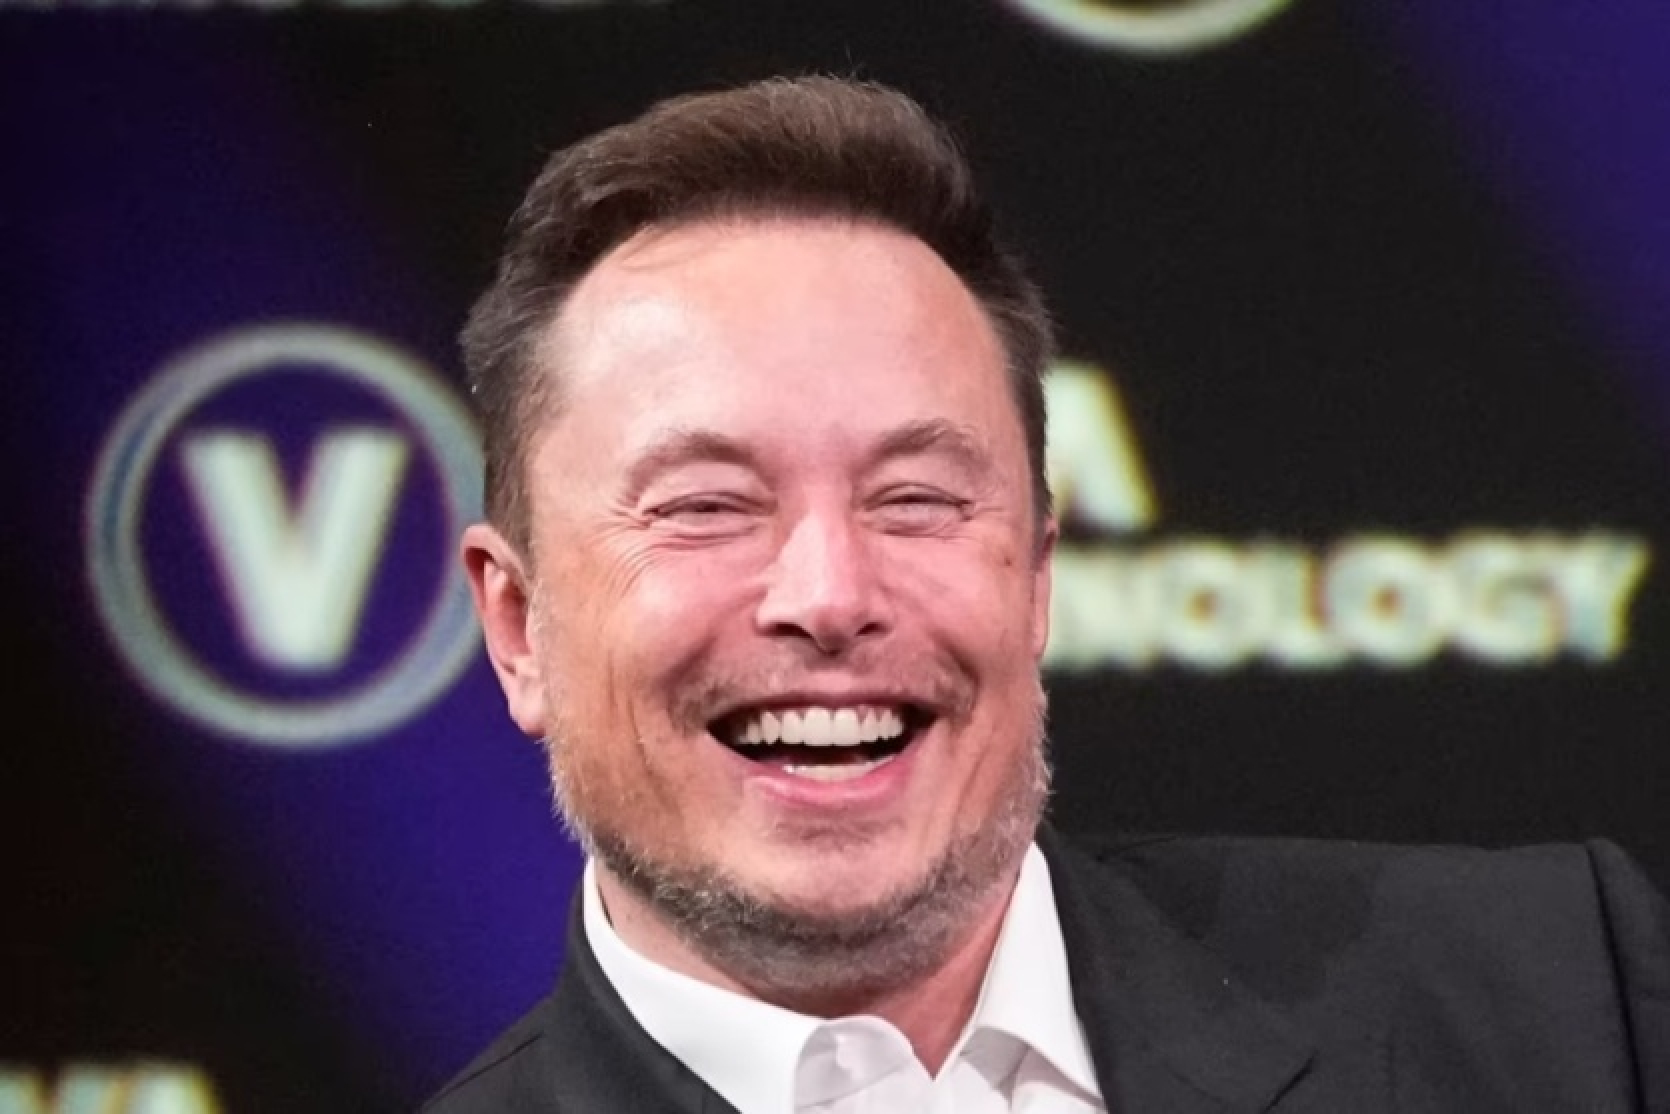 Ilon Musk says taking ketamine during low mood periods is in investors' best interest